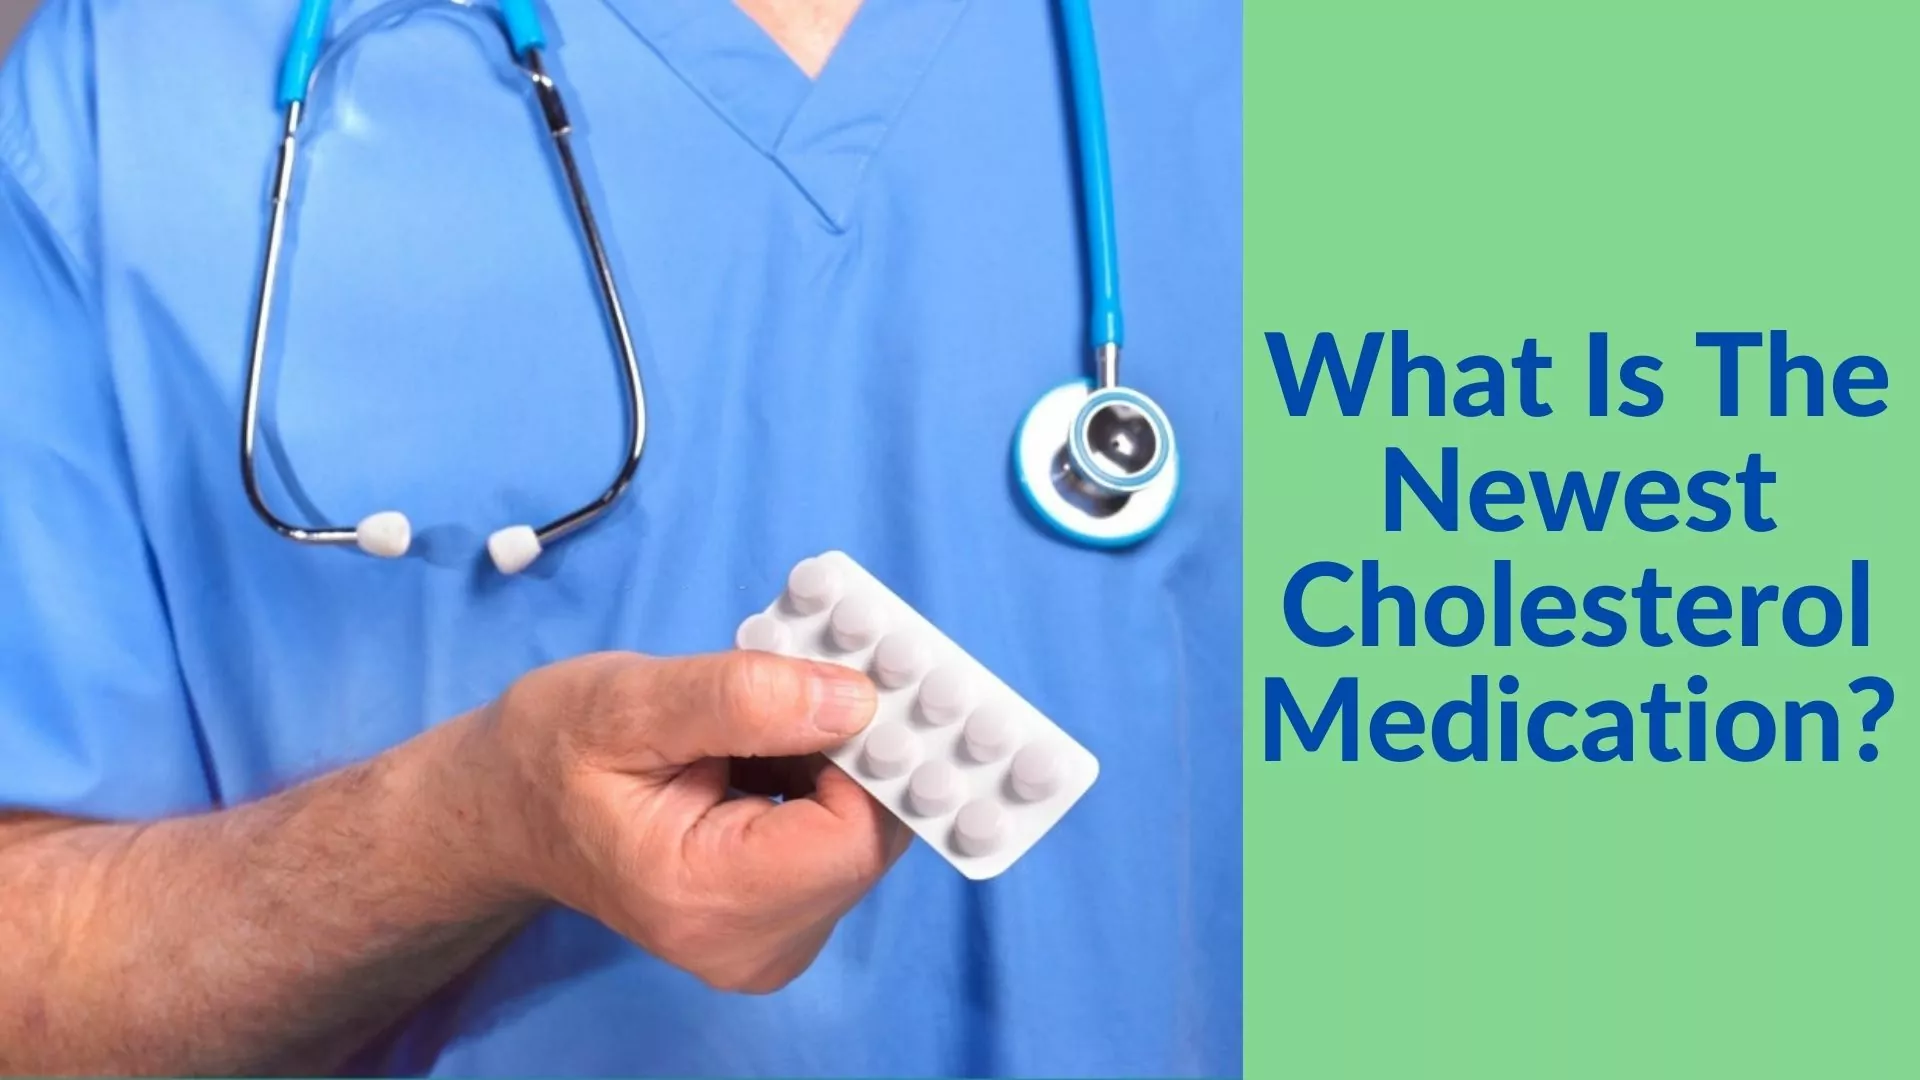 What Is The Newest Cholesterol Medication